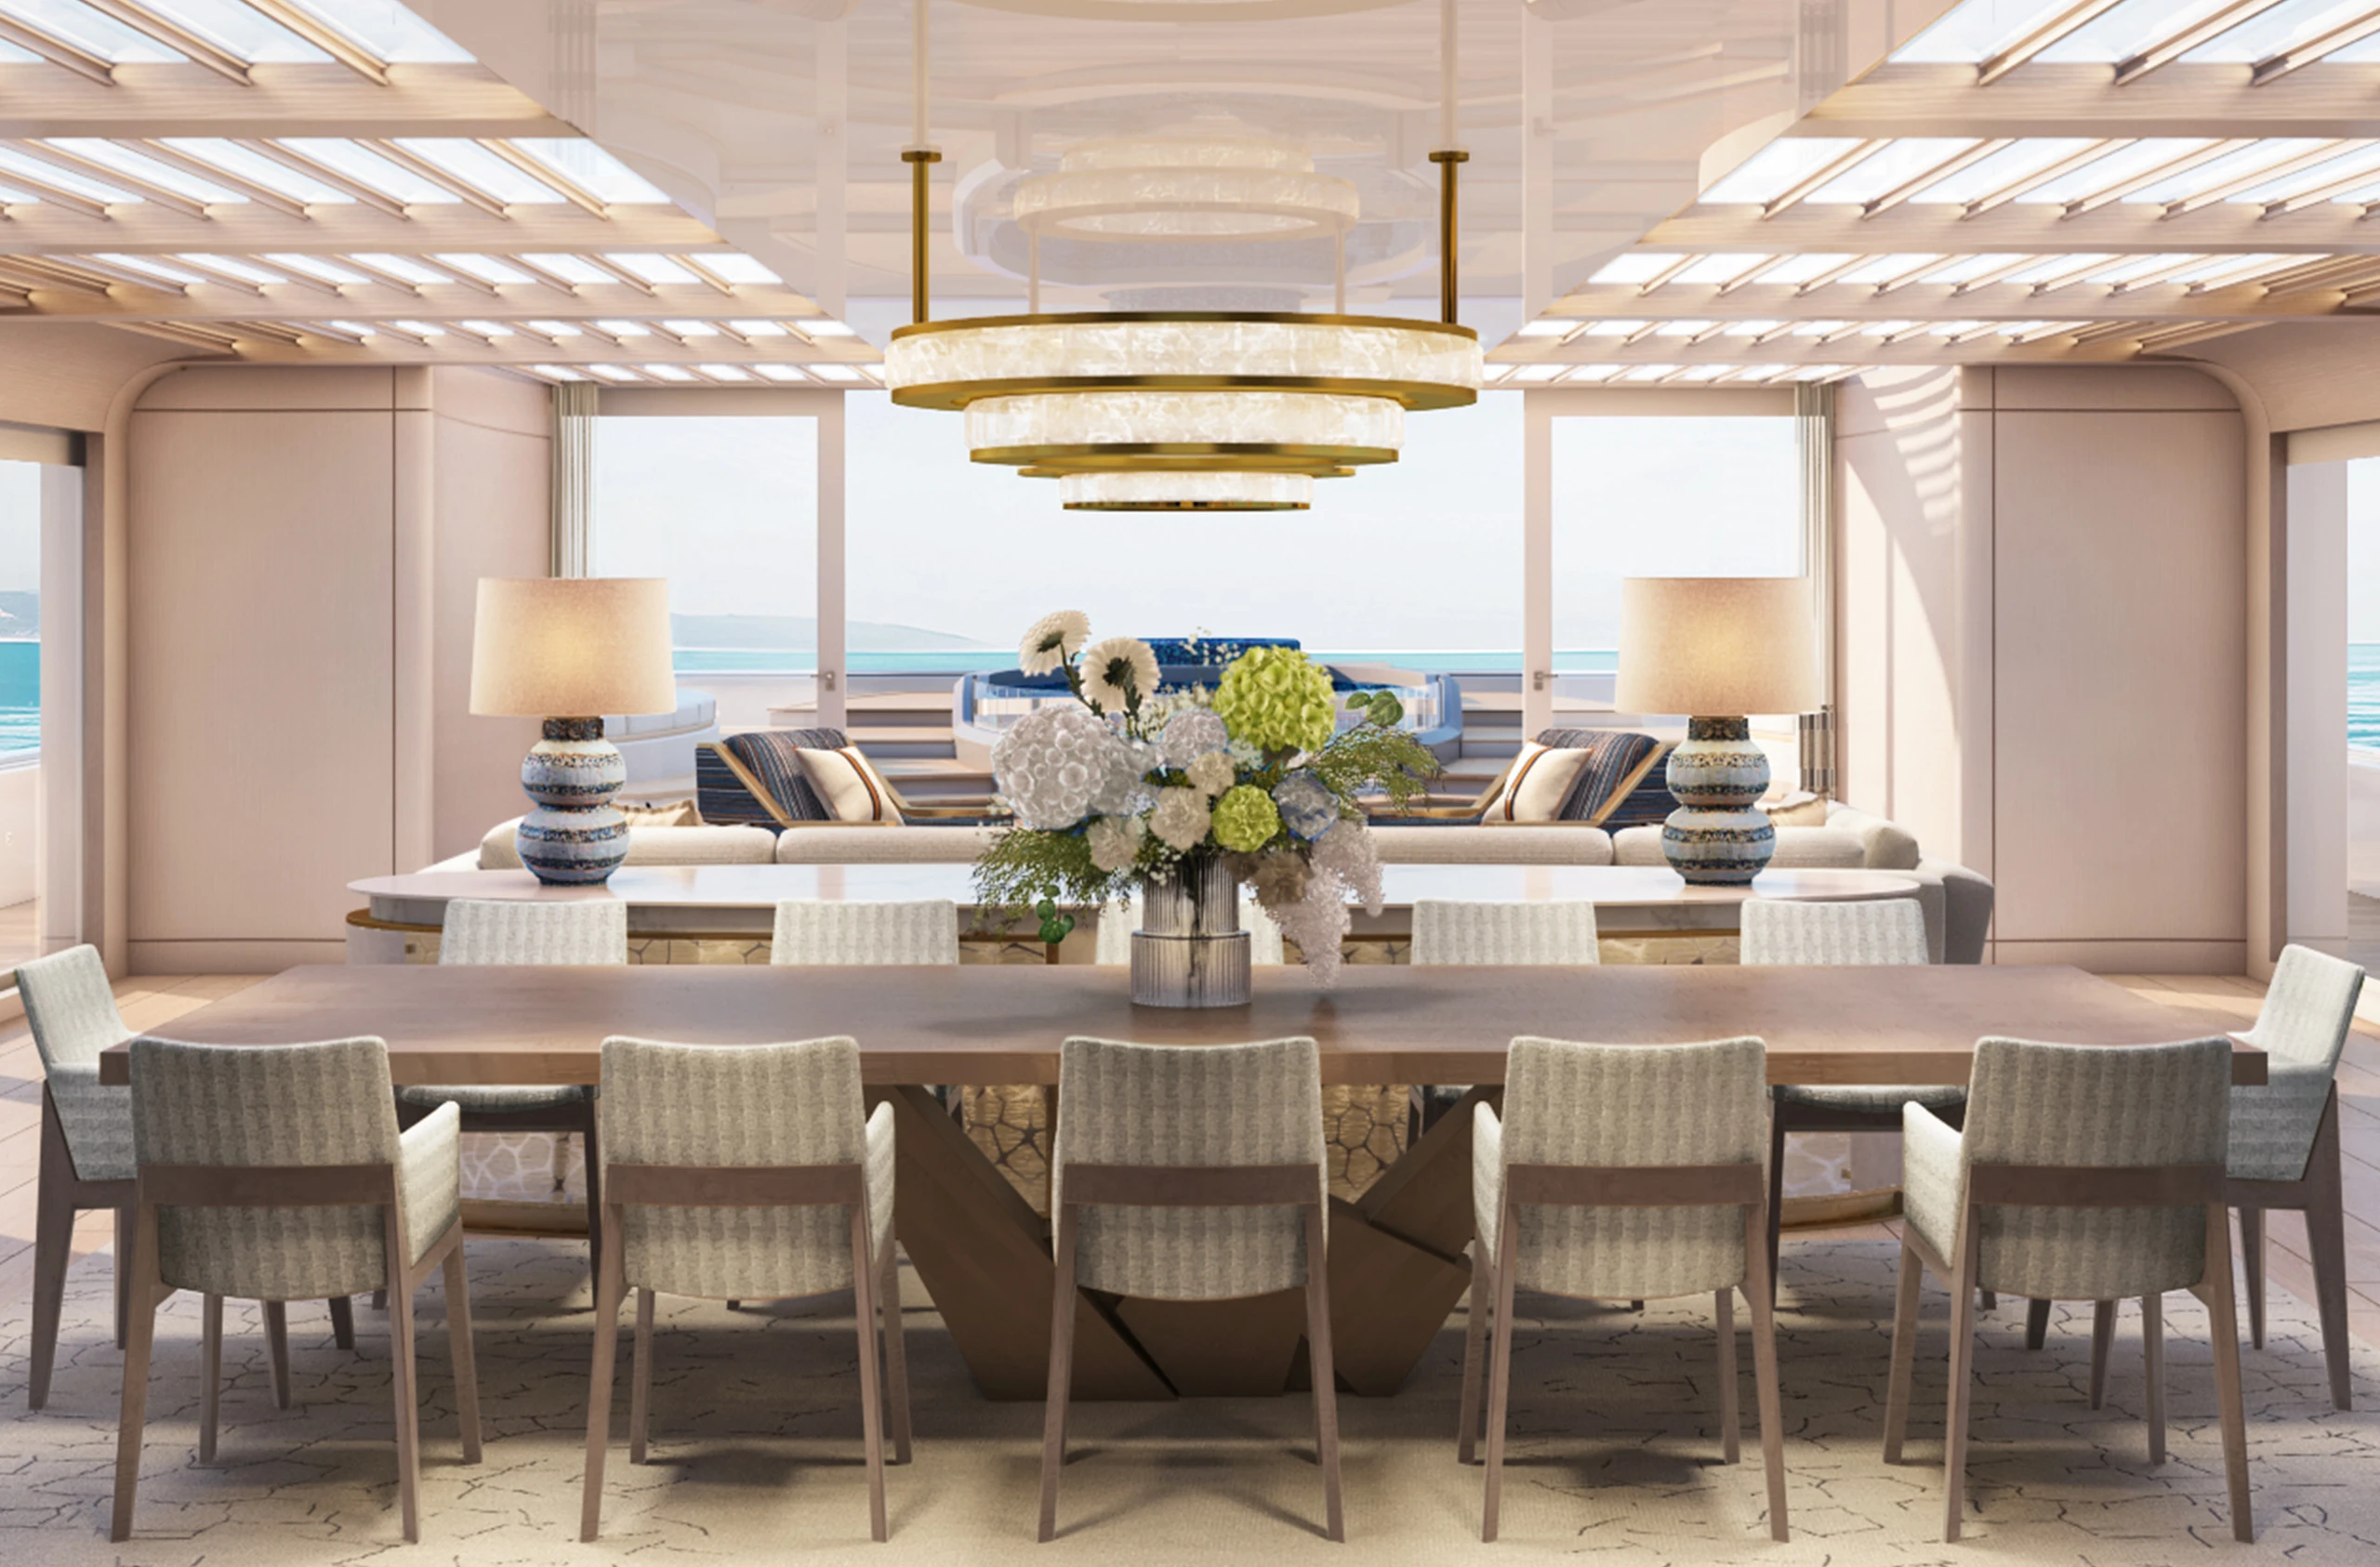 onboard the most recently launched superyachts around the world, interior design by katharine pooley